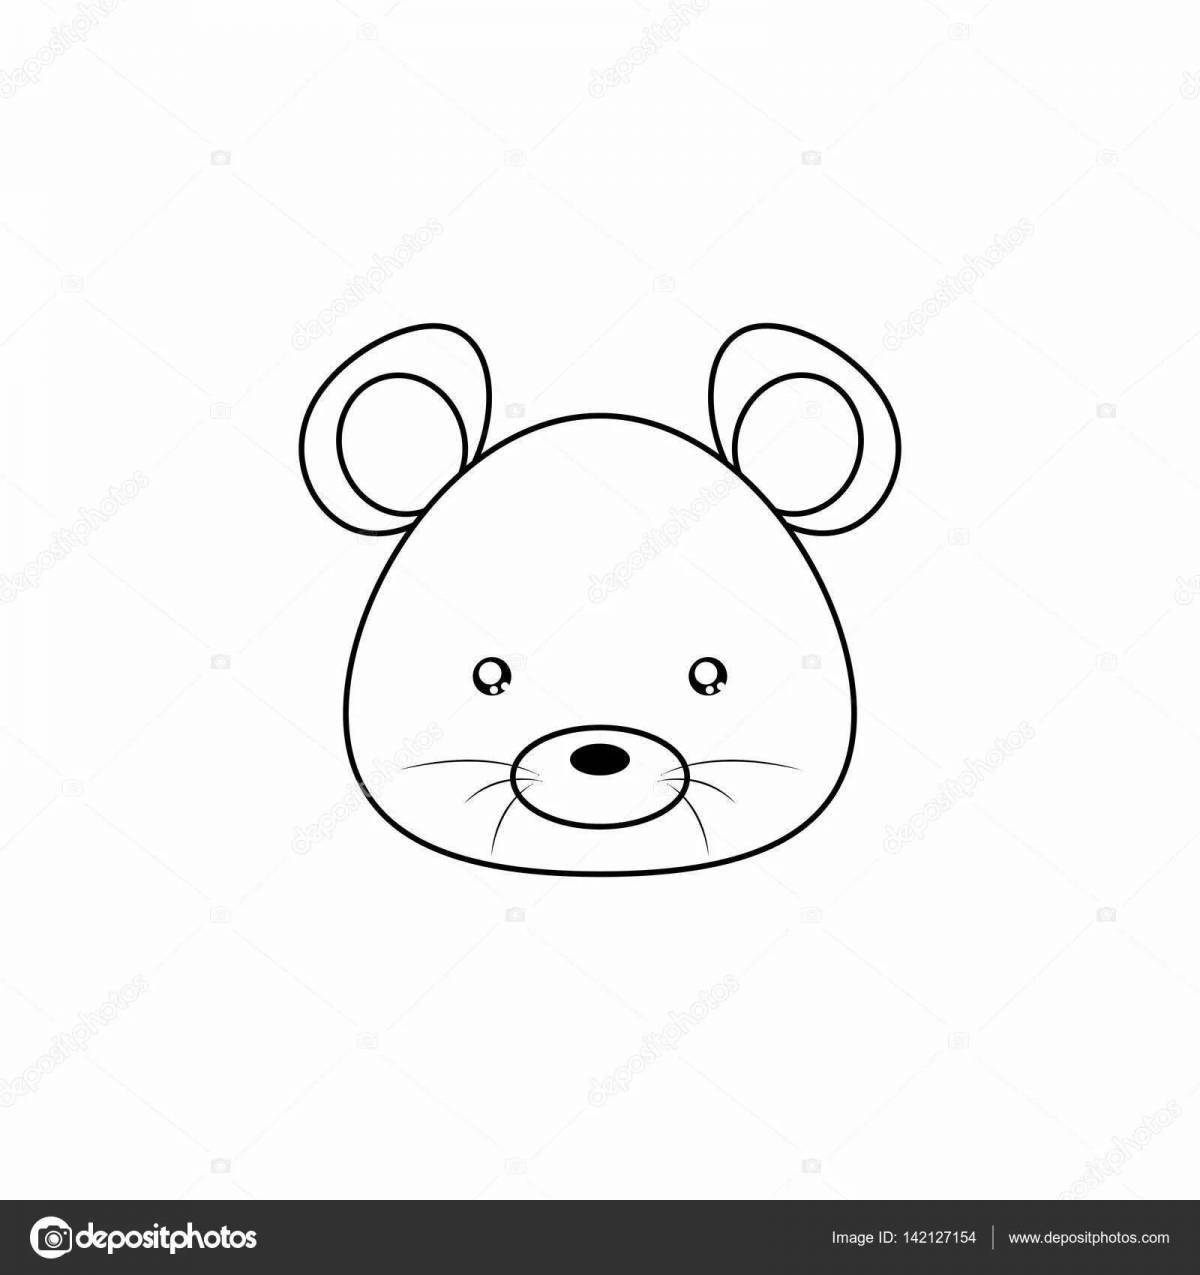 Cute mouse head coloring page